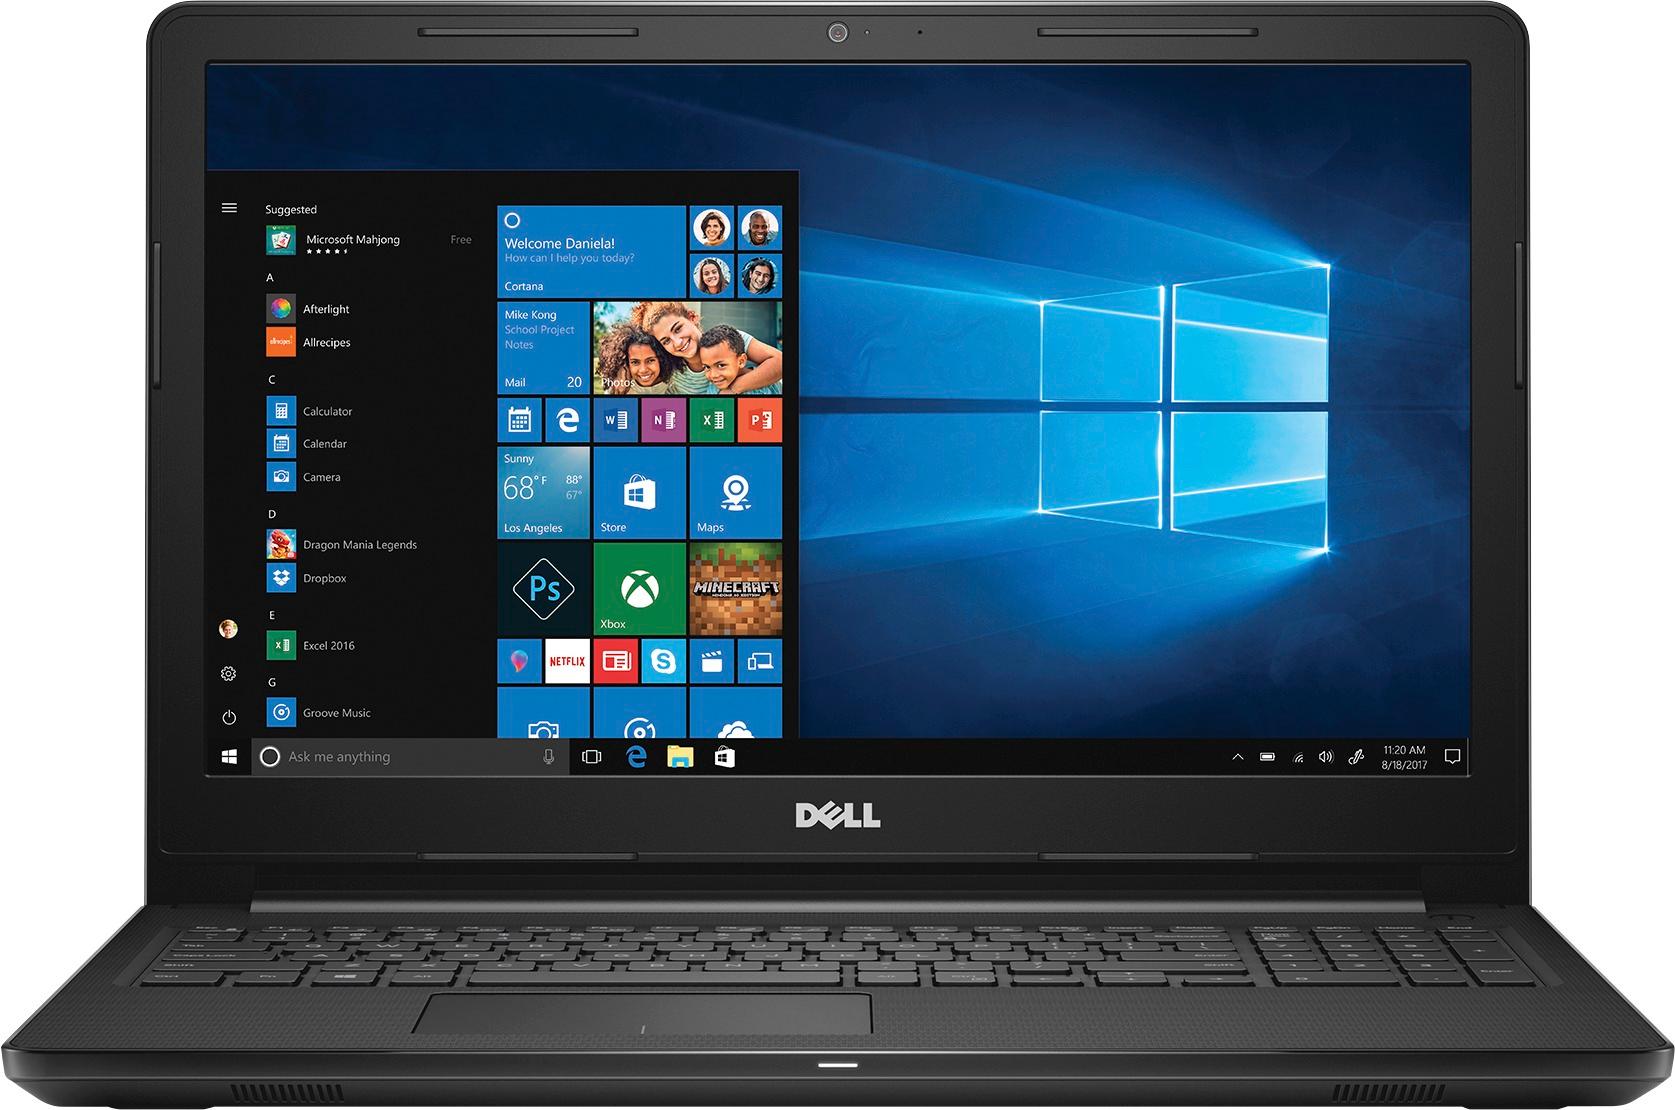 Best Buy Dell Inspiron 15 6 Touch Screen Laptop Intel Core I3 6gb Memory 1tb Hard Drive Black I3567 3657blk Pus